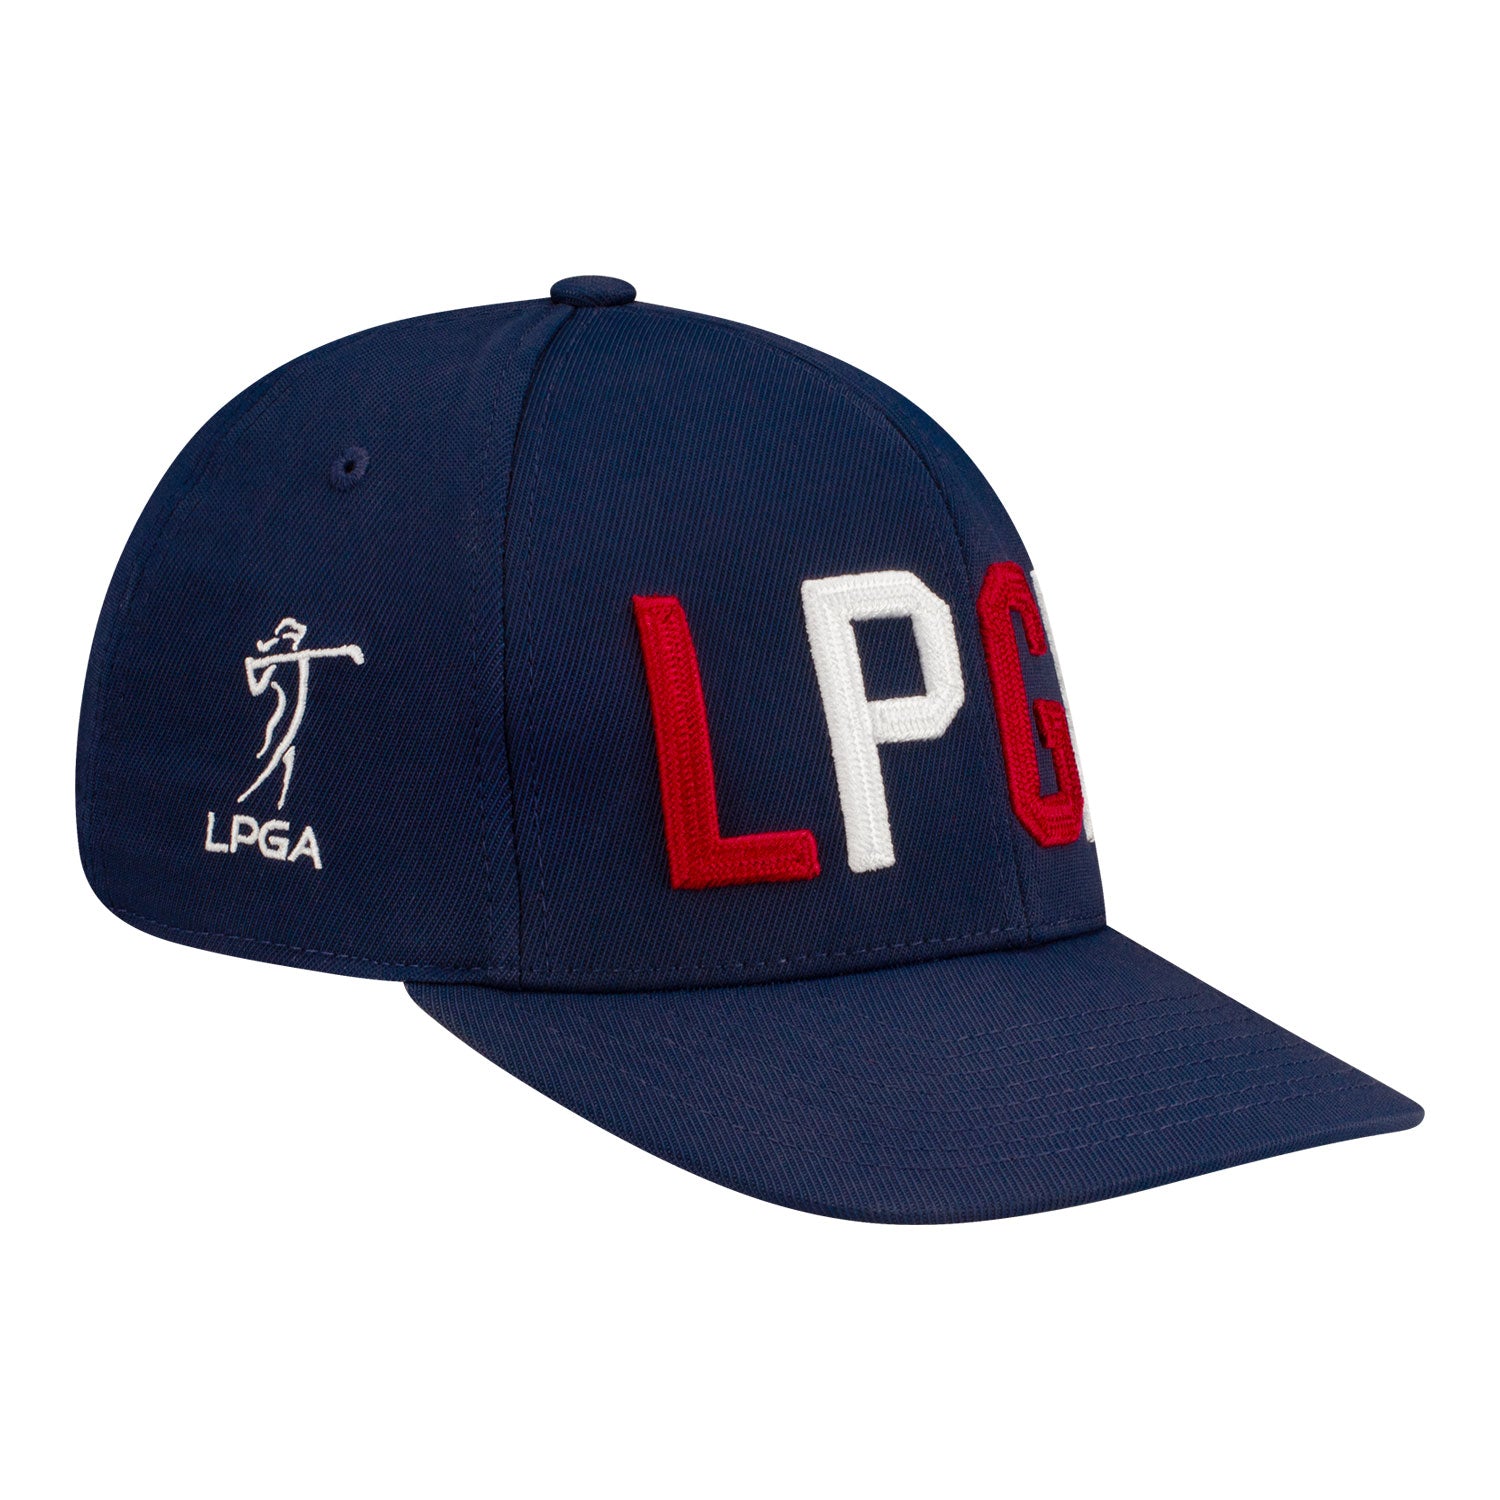 G/Fore LPGA Block Text Hat in Navy - Front Right View